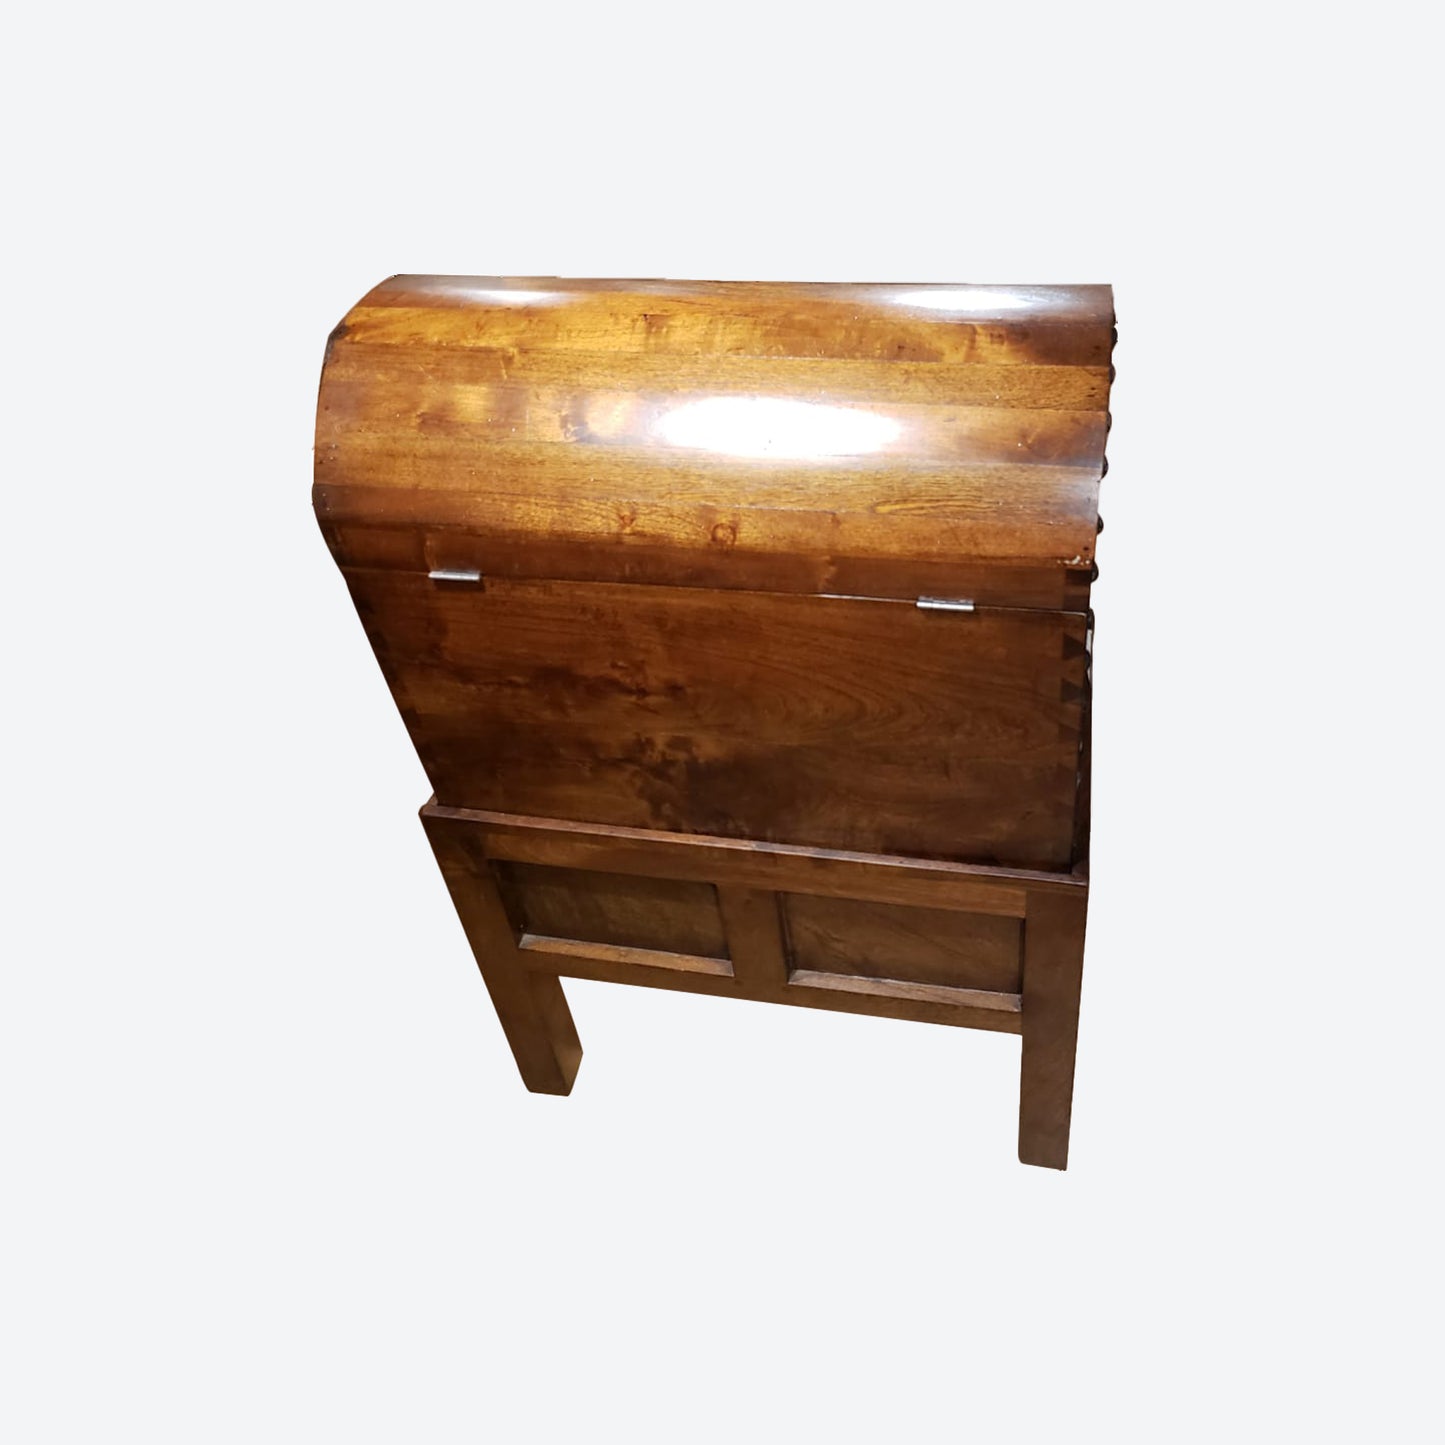 Mesquite   WOOD CHEST CABINET WITH DRAWERS -SK- SKU 1045